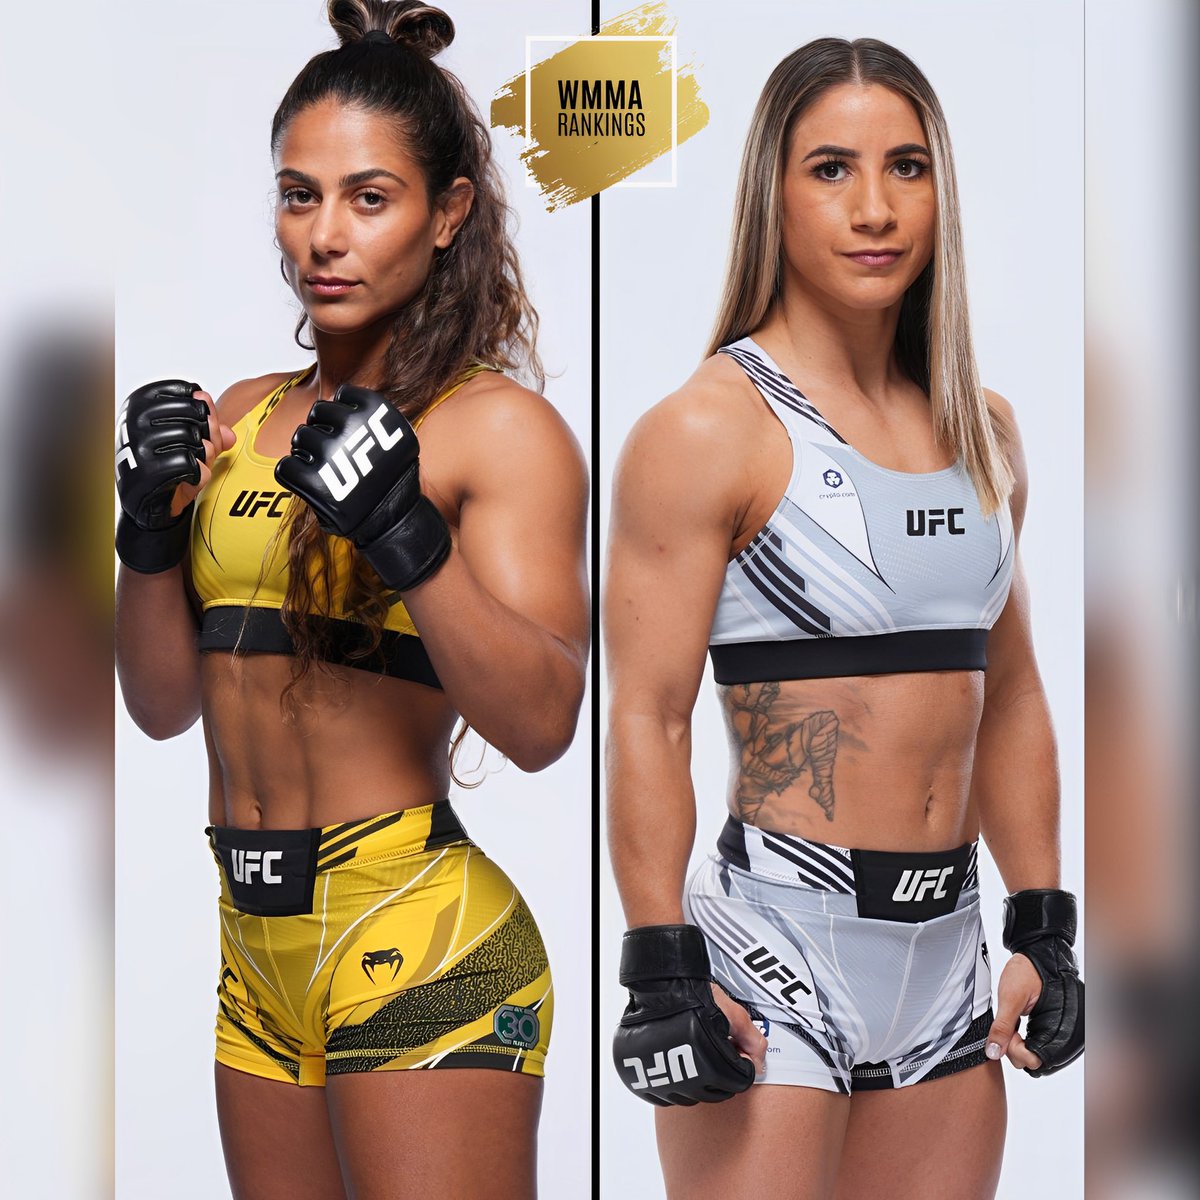 🔥 No UFC tonight, but there’s plenty to look forward to! Get ready for an exciting strawweight showdown in 3 weeks at #UFCStLouis on May 11! 🥊 #11 ranked 'Baby Shark' 🇧🇷 Tabatha Ricci faces returning veteran 'The Tiny Tornado' 🇺🇸 Tecia Torres.

Ricci has impressed at 115lbs,…